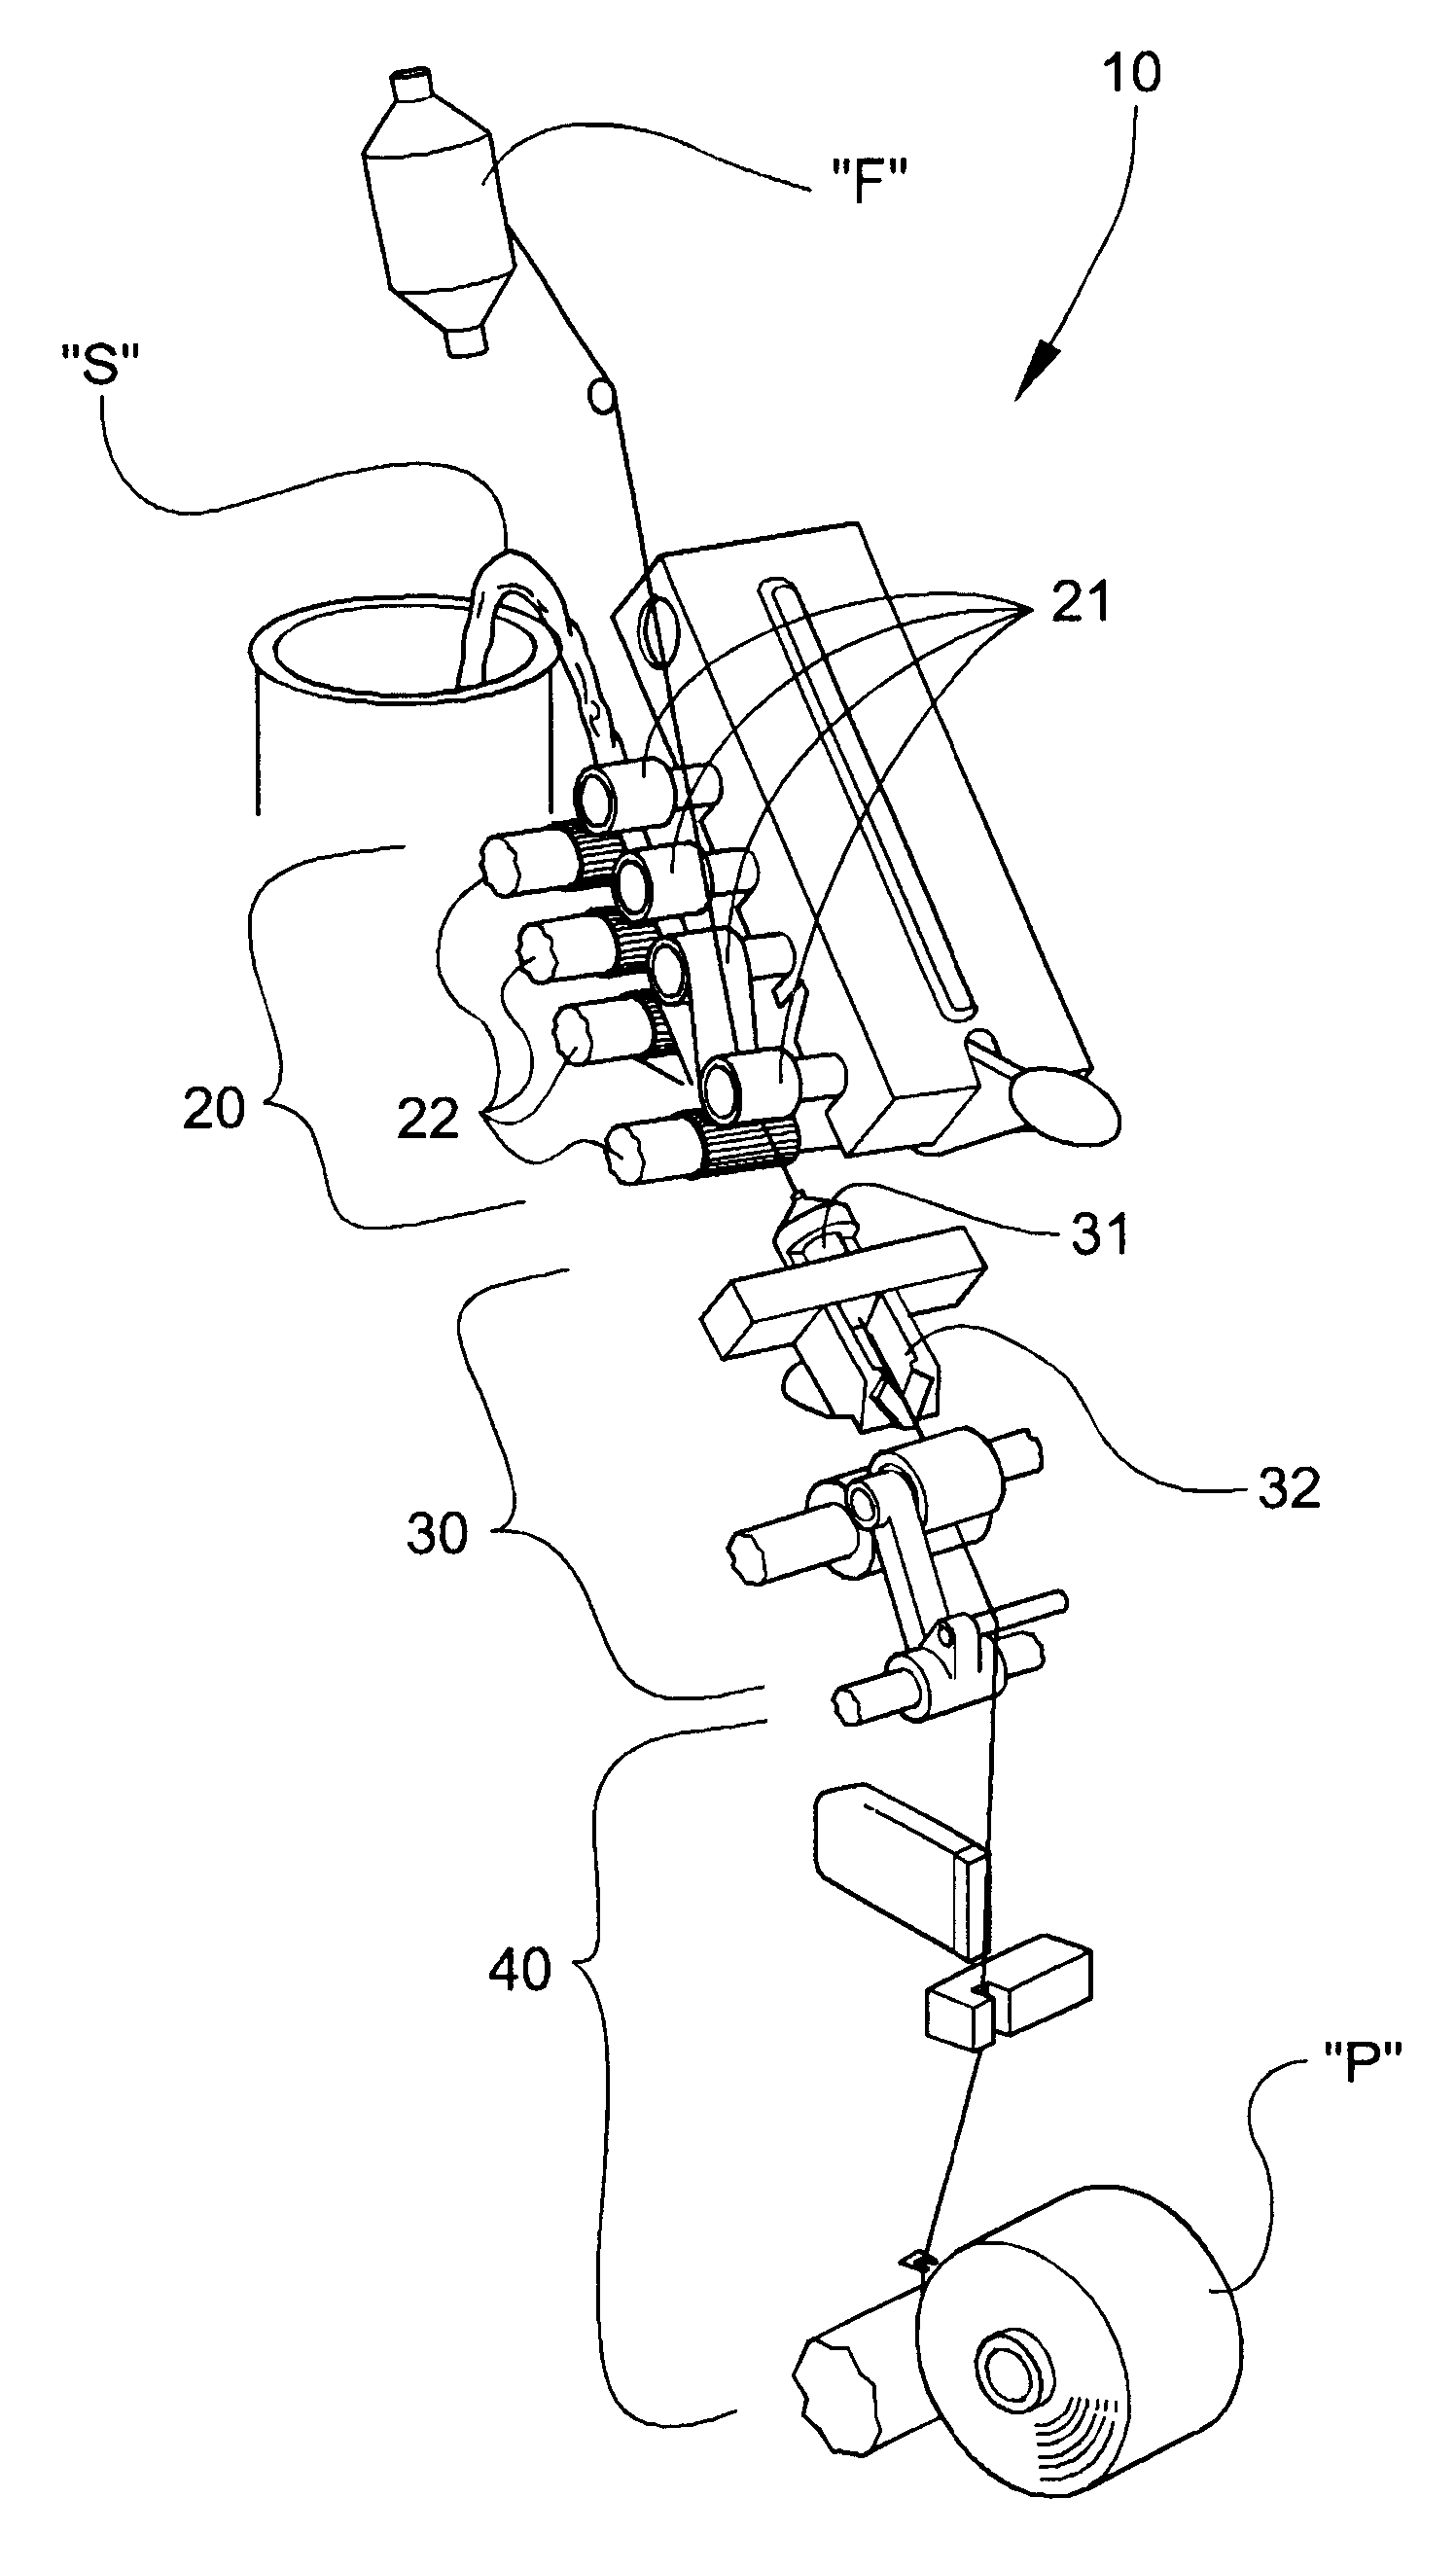 Composite, break-resistant sewing thread and method